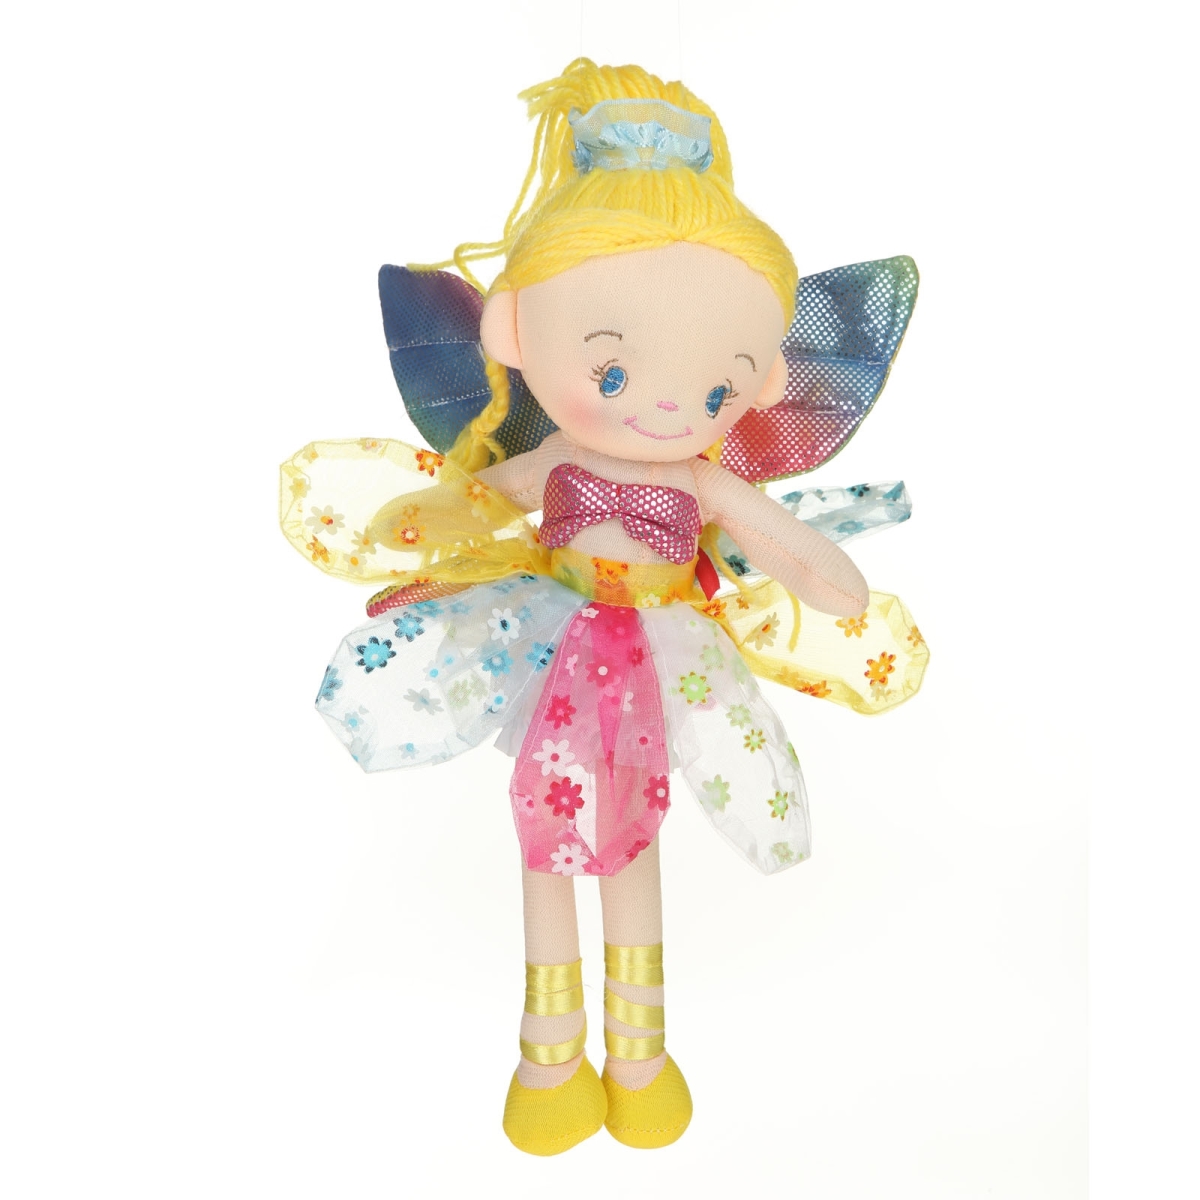 Mm07 12 In. Plush Haired Blond Fairy Doll